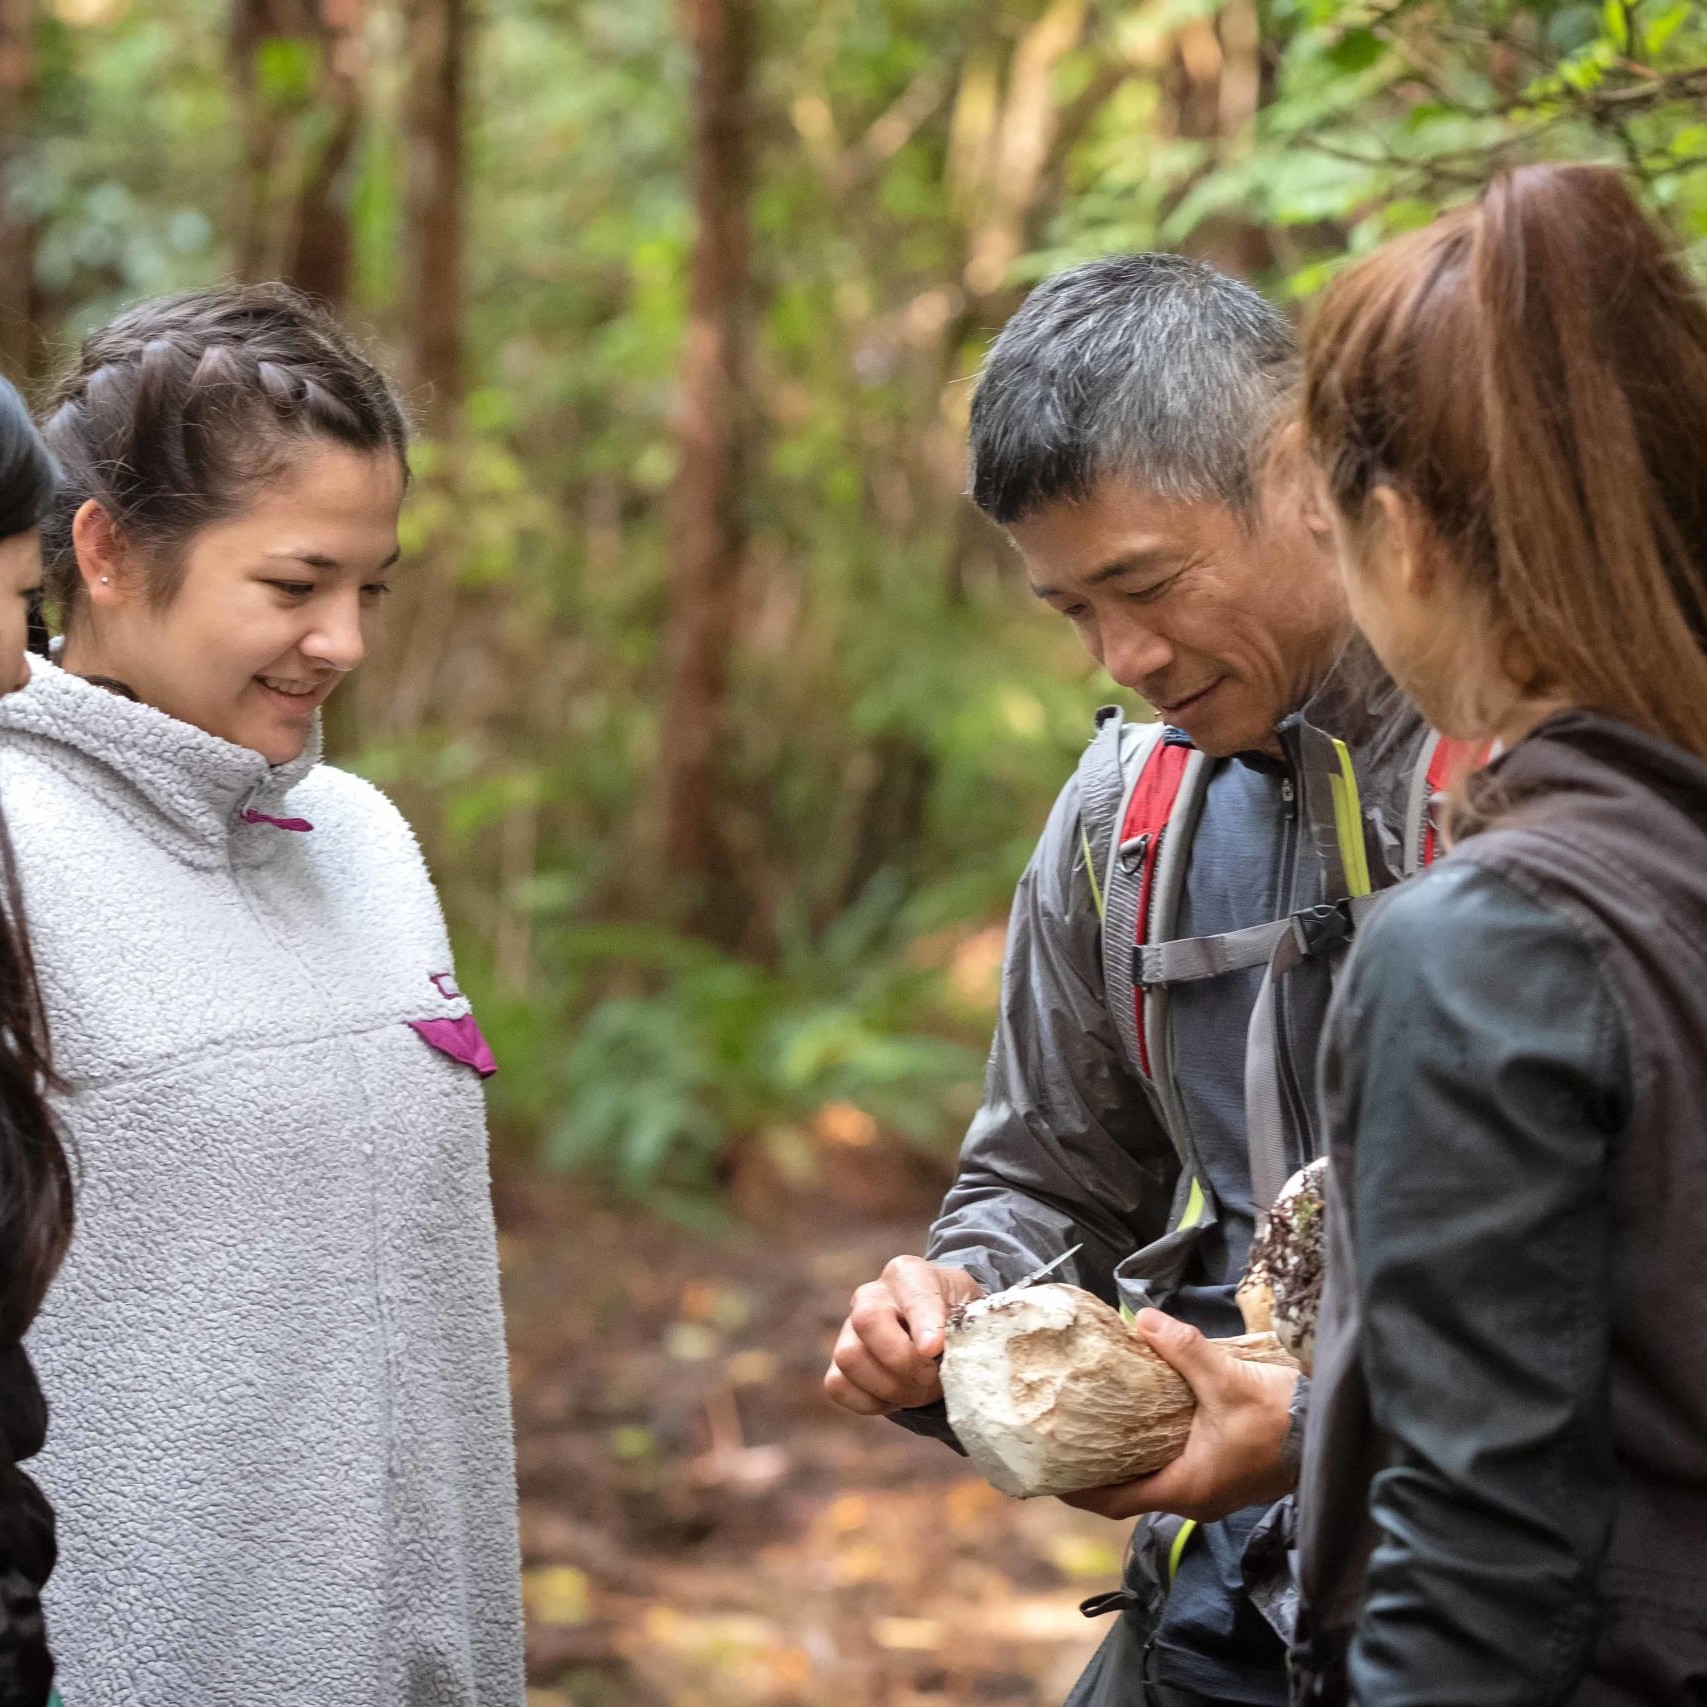 Group of teens with a mentor stop on a hike to whittle a piece of wood.